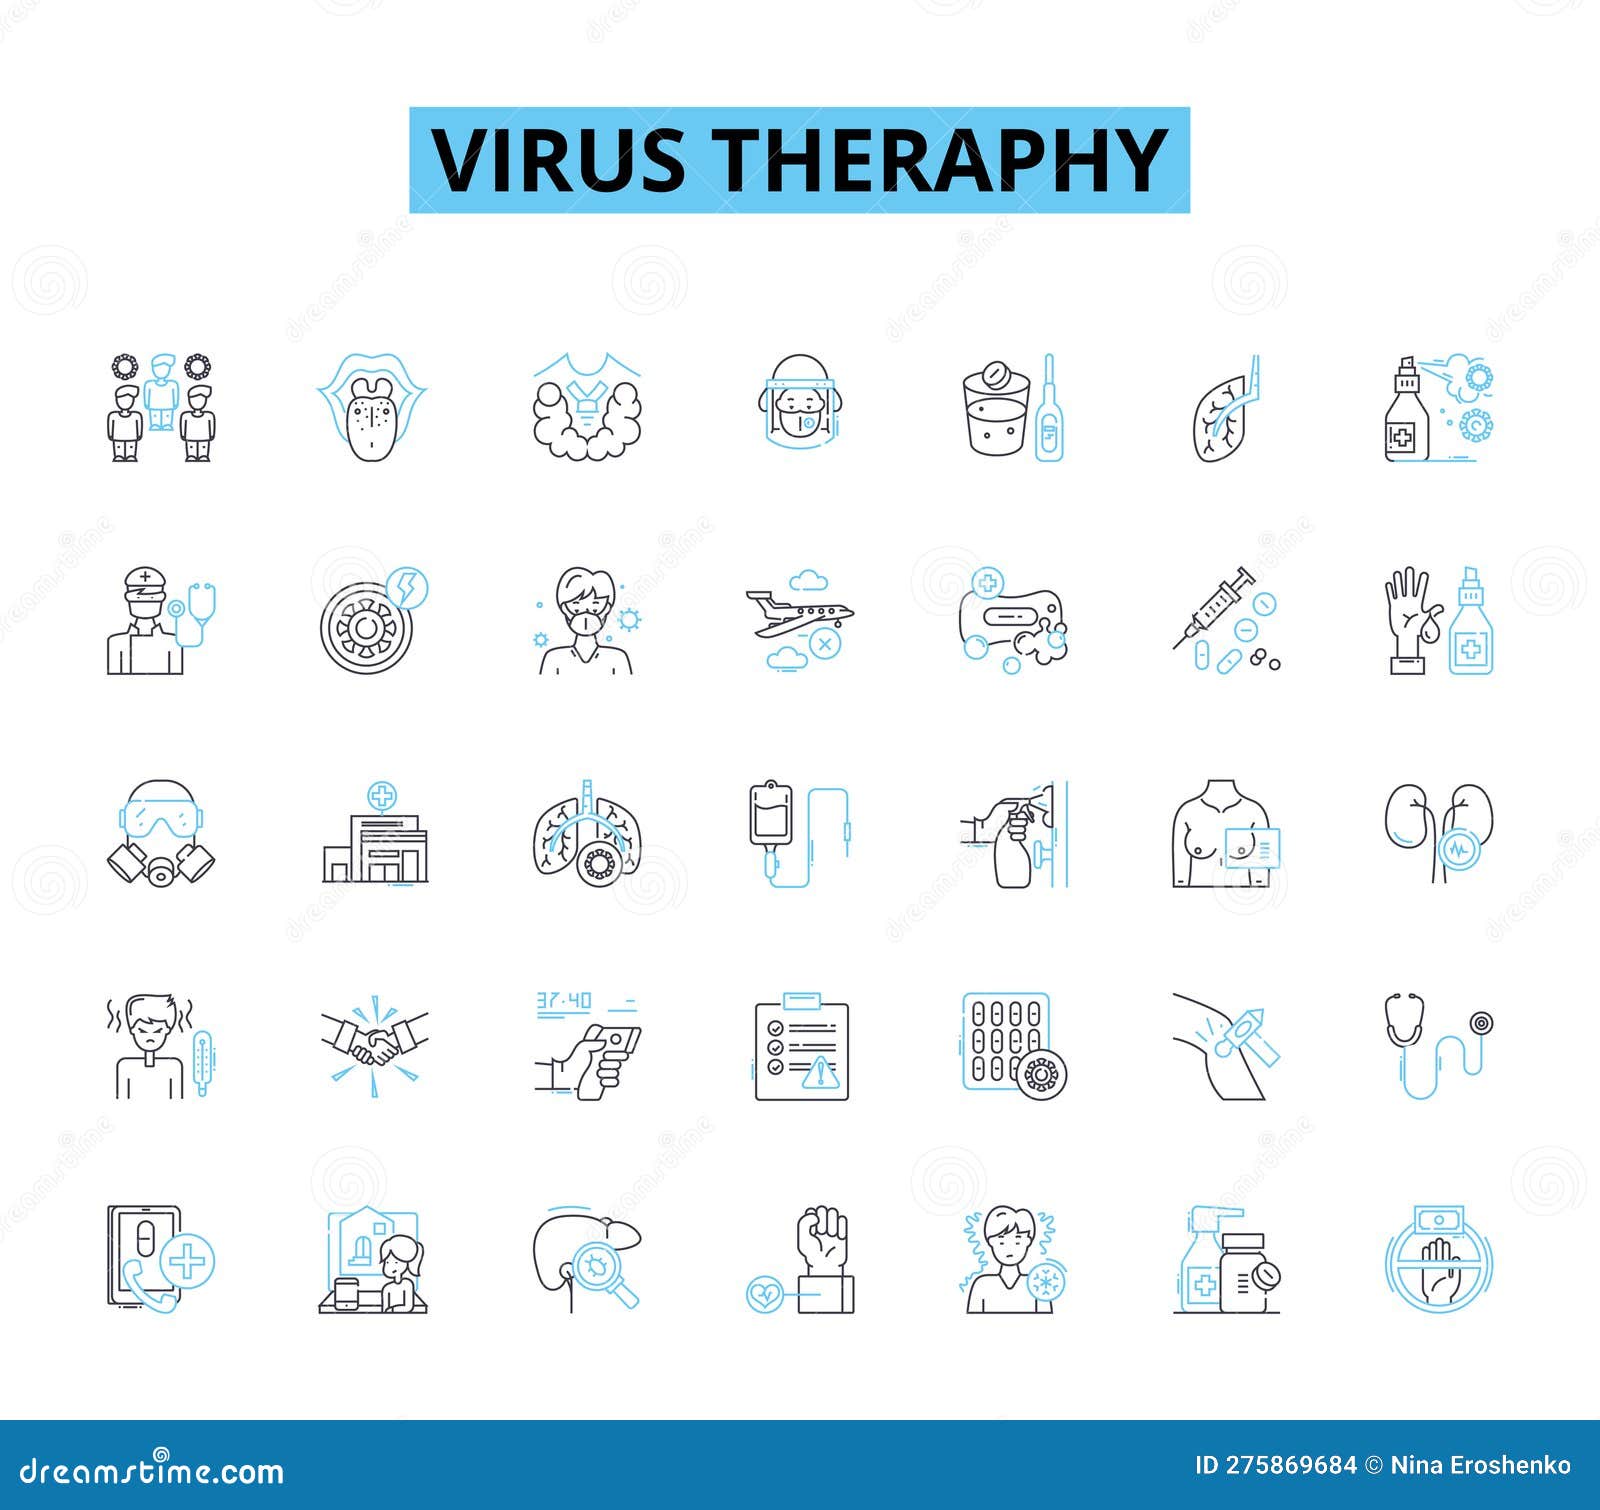 virus theraphy linear icons set. immunotherapy, gene therapy, antivirals, vaccines, antibodies, retrovirus, oncolytic